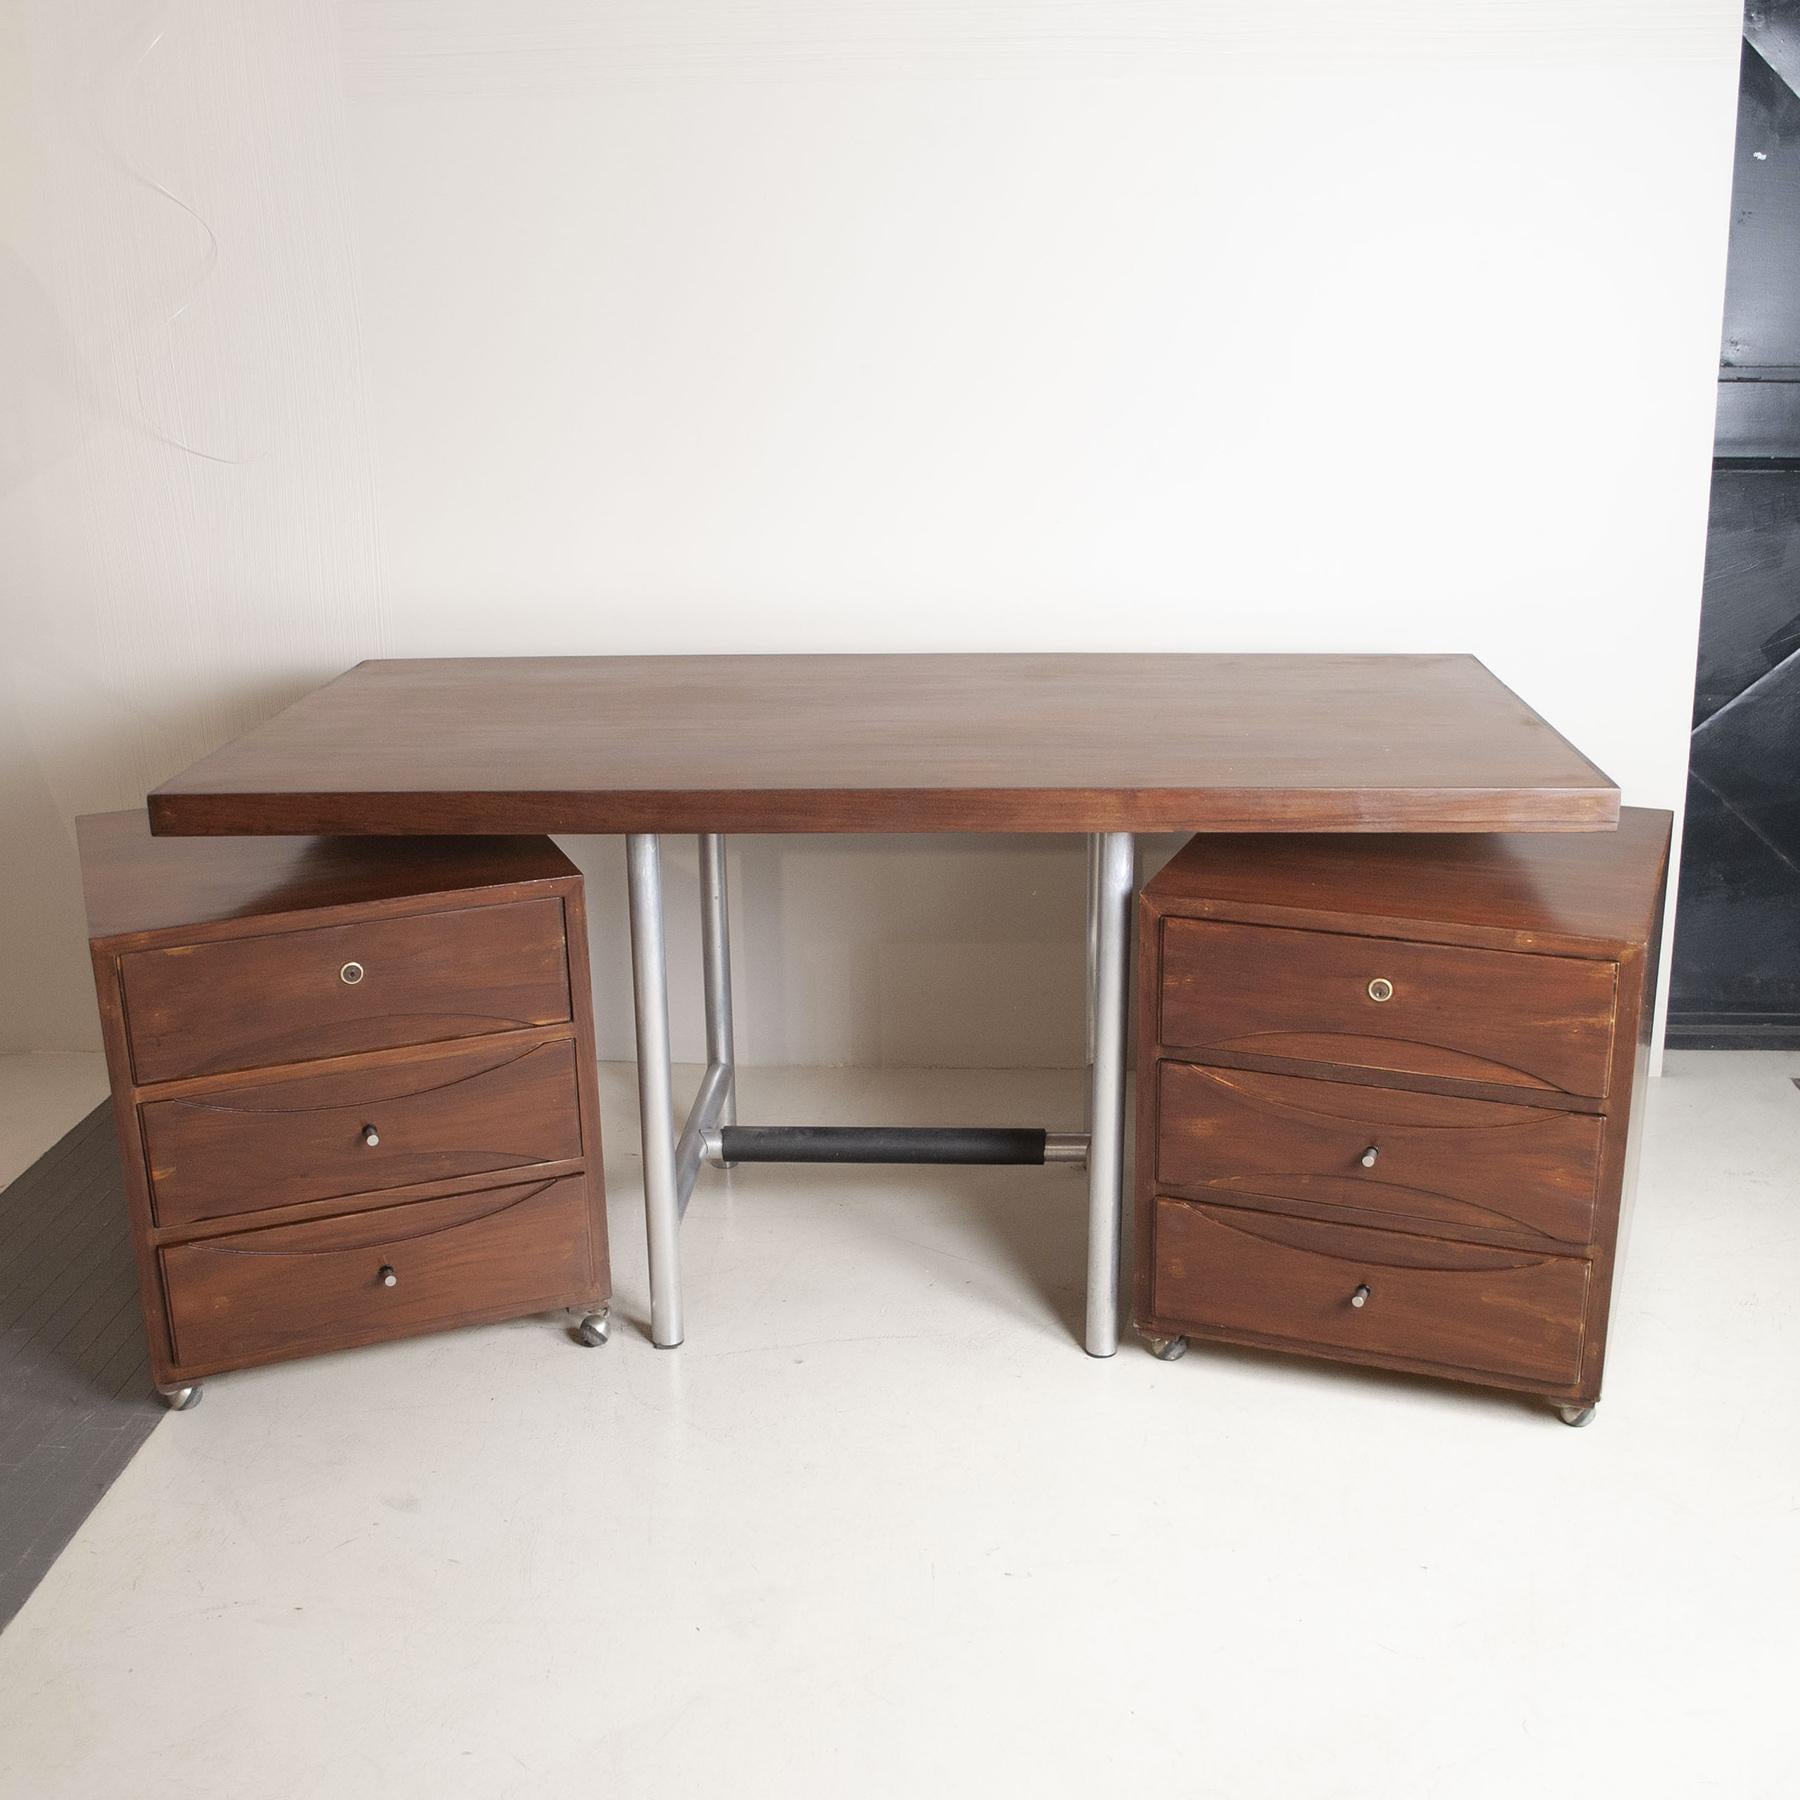 Sectional desk 1960s double removable drawers.